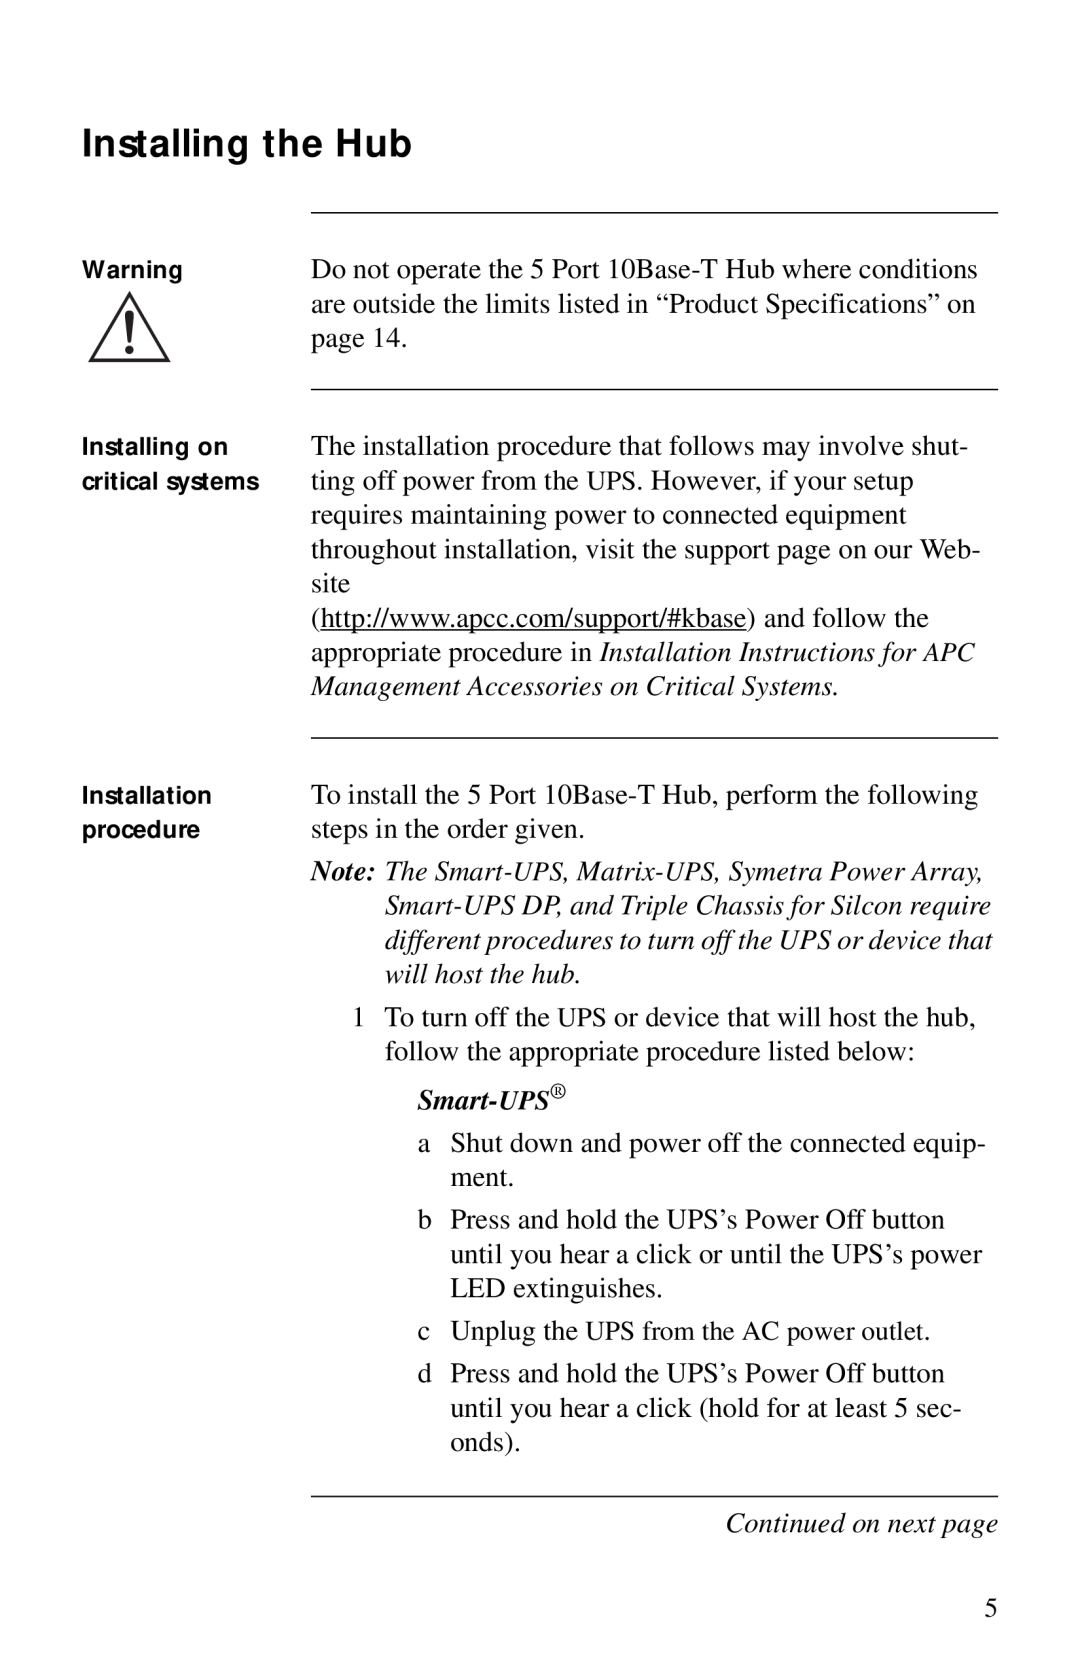 American Power Conversion AP9615 Installing the Hub, appropriate procedure in Installation Instructions for APC, Smart-UPS 